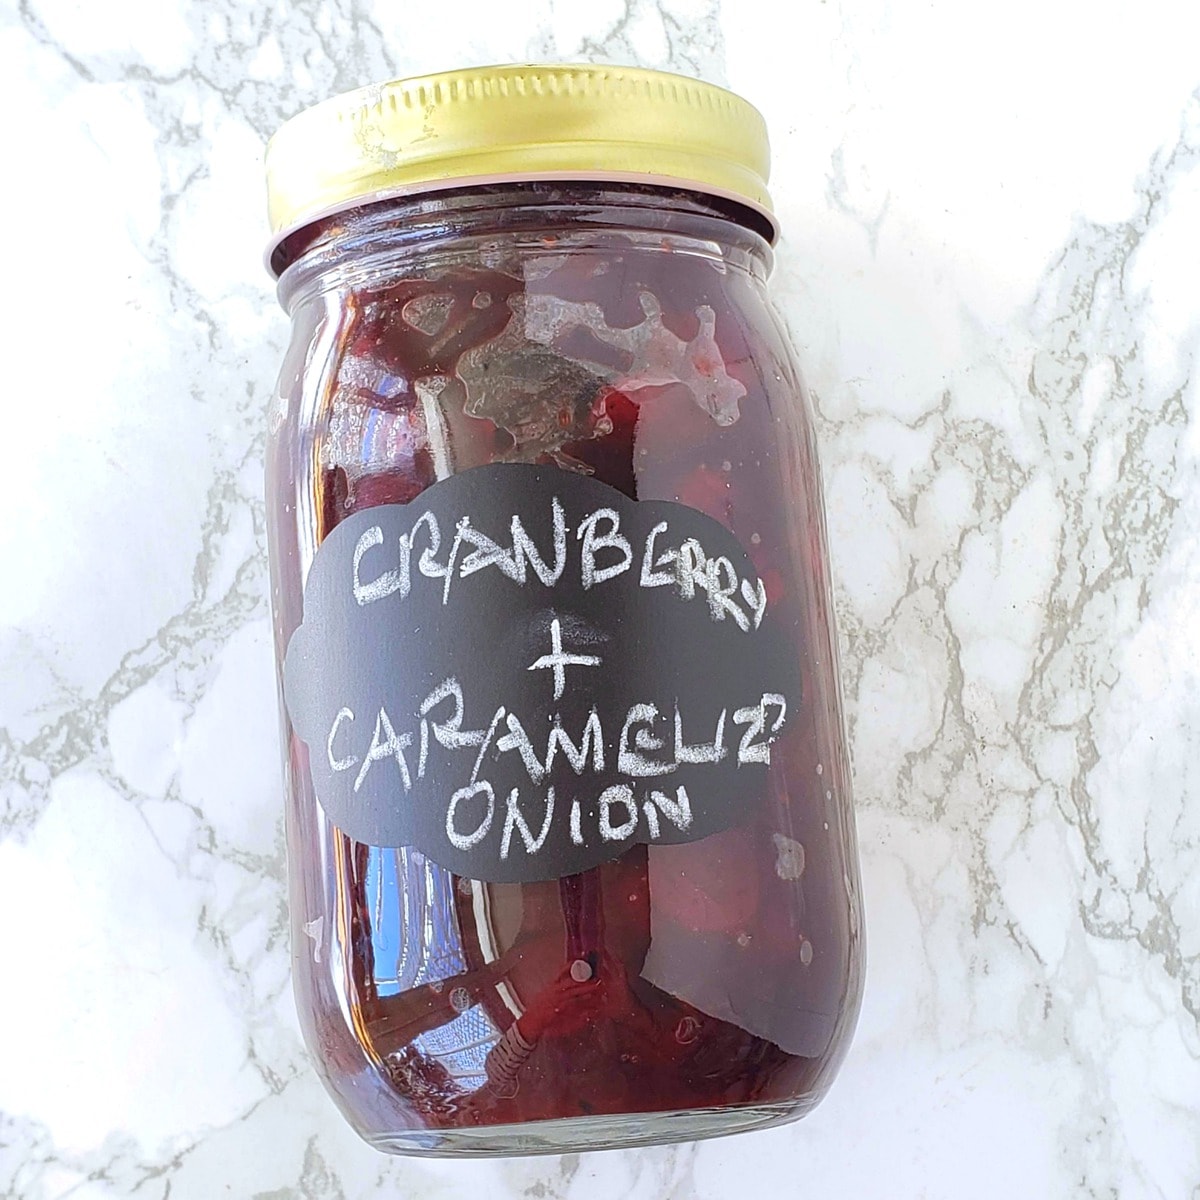 Store the cranberry sauce in a jar in the refrigerator